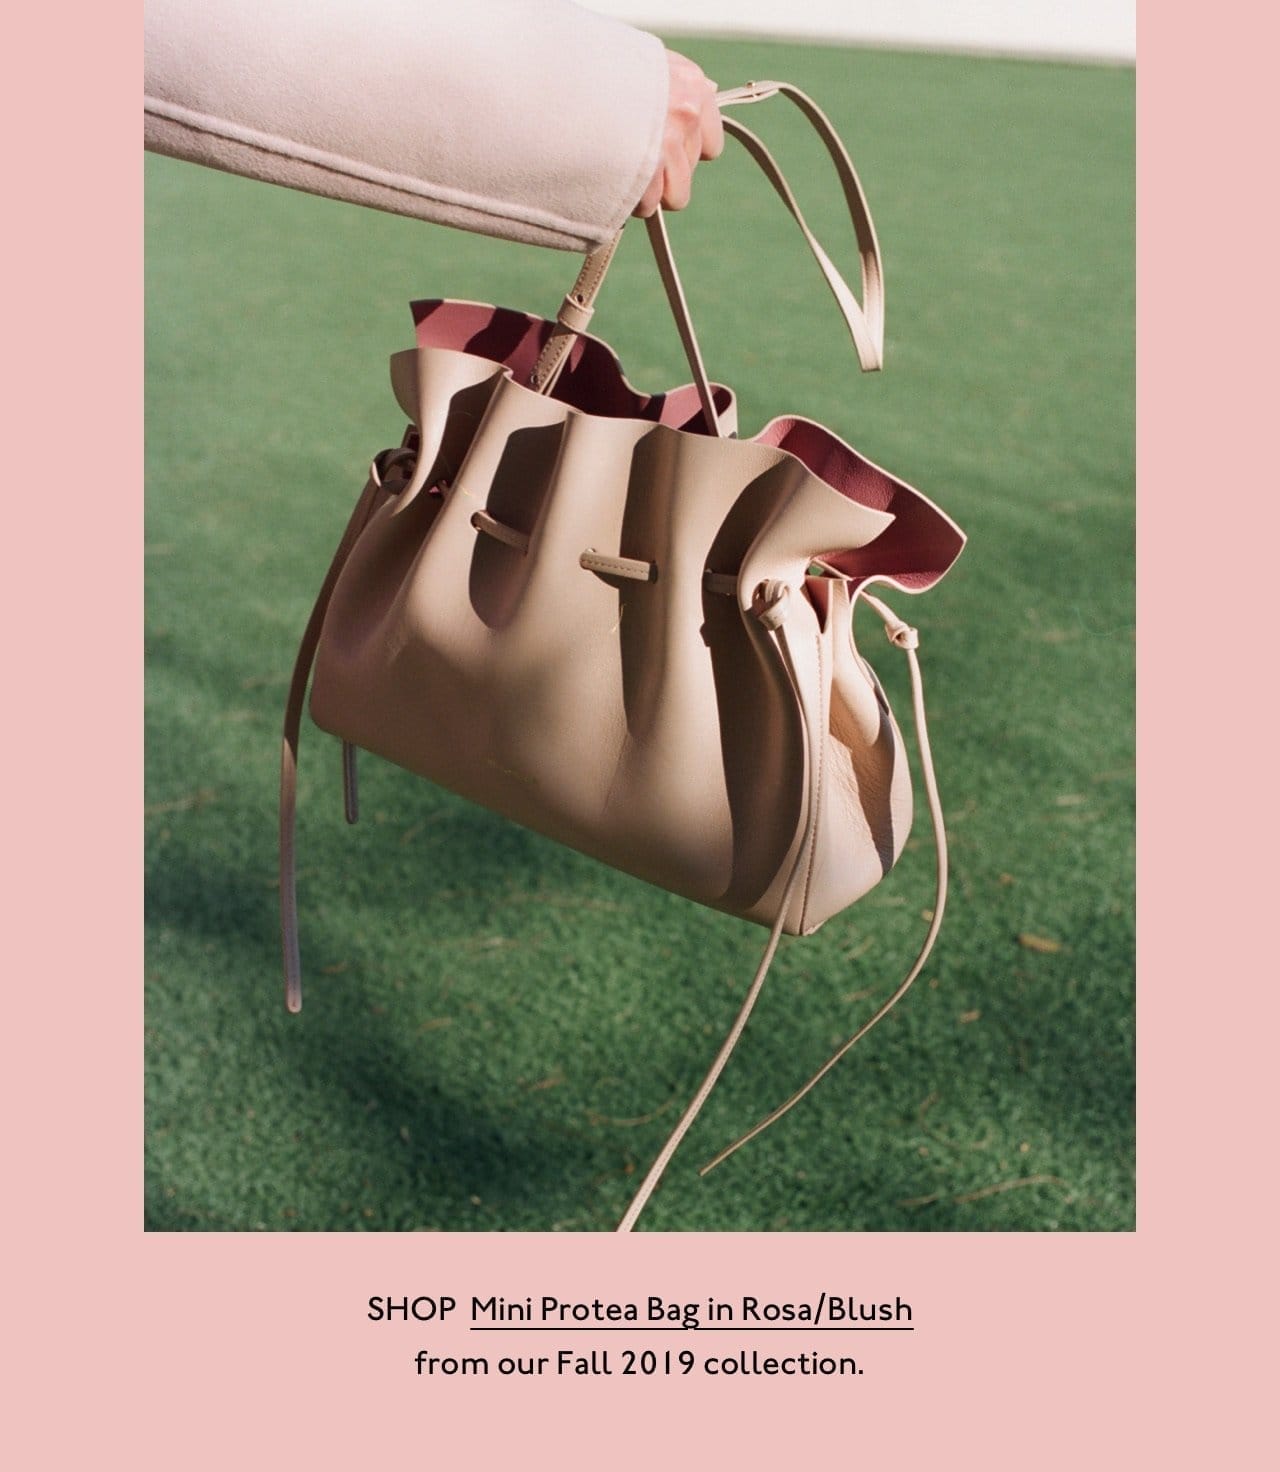 Shop the Mini Protea Bag in Rosa/Blush from our Fall 2019 collection.